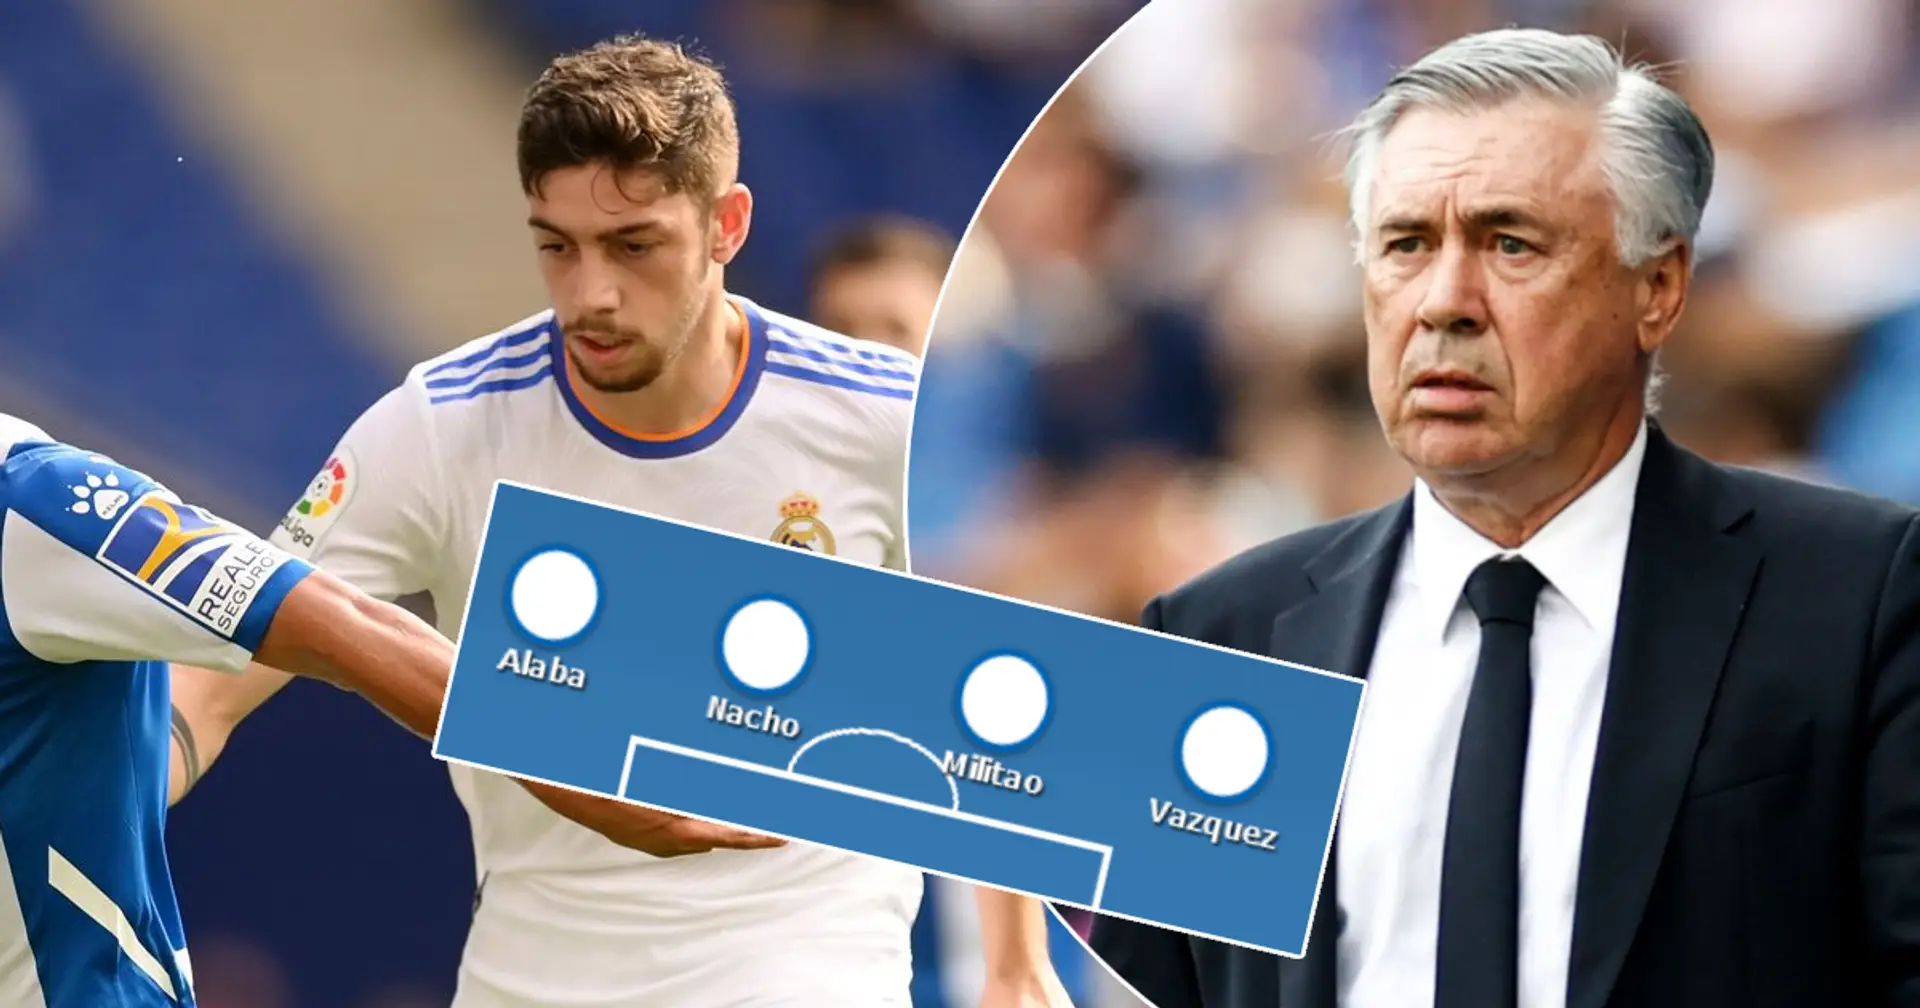 Benching Miguel, Valverde in attack: Dissecting mistakes in Ancelotti's formation in Espanyol defeat